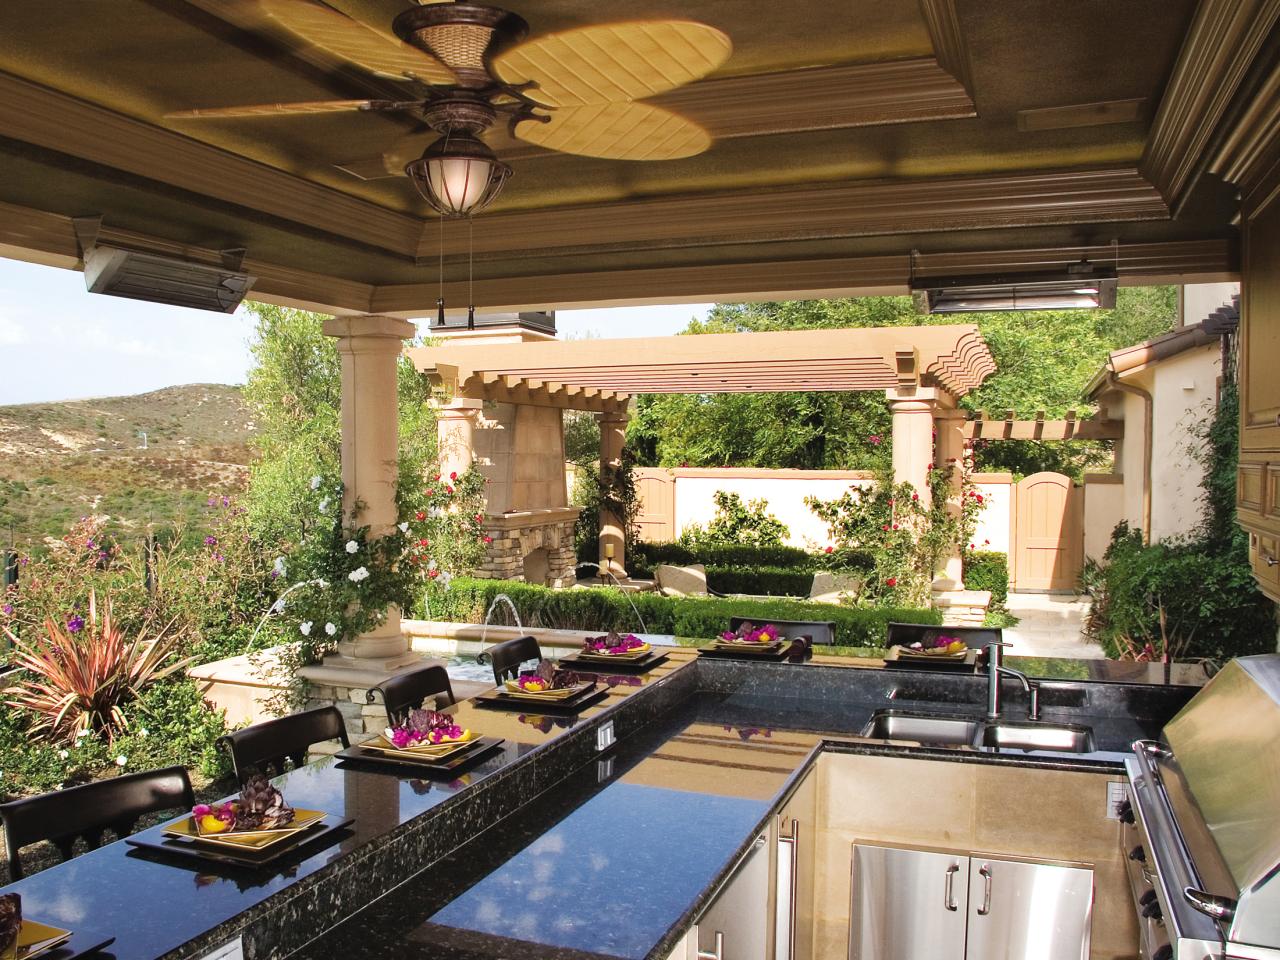 Outdoor Kitchen Countertops Options, What Is The Best Material For Outdoor Kitchen Countertops